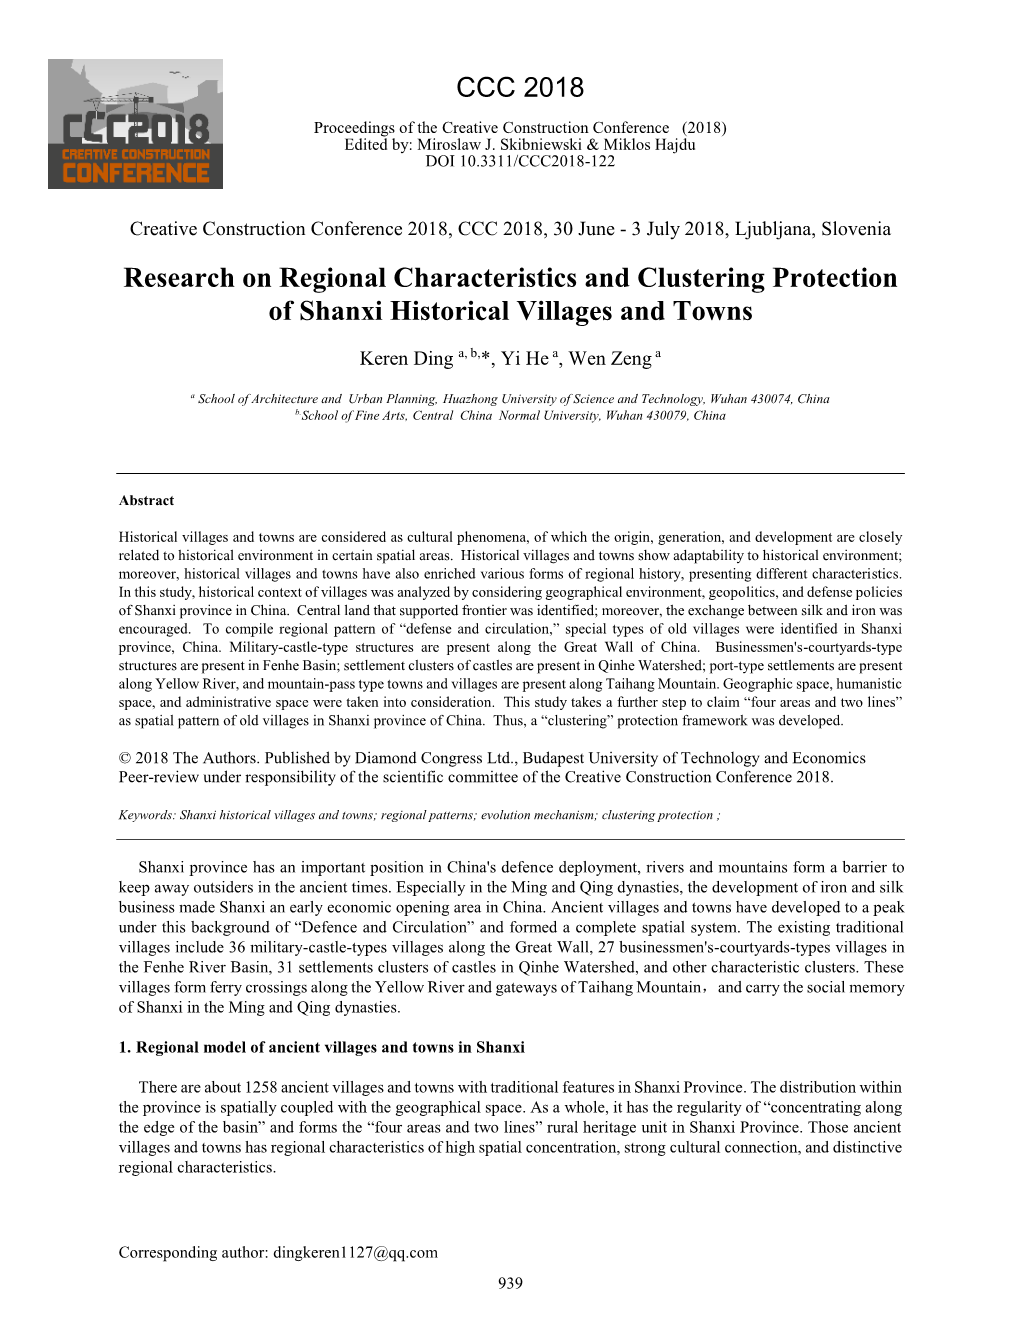 Research on Regional Characteristics and Clustering Protection of Shanxi Historical Villages and Towns